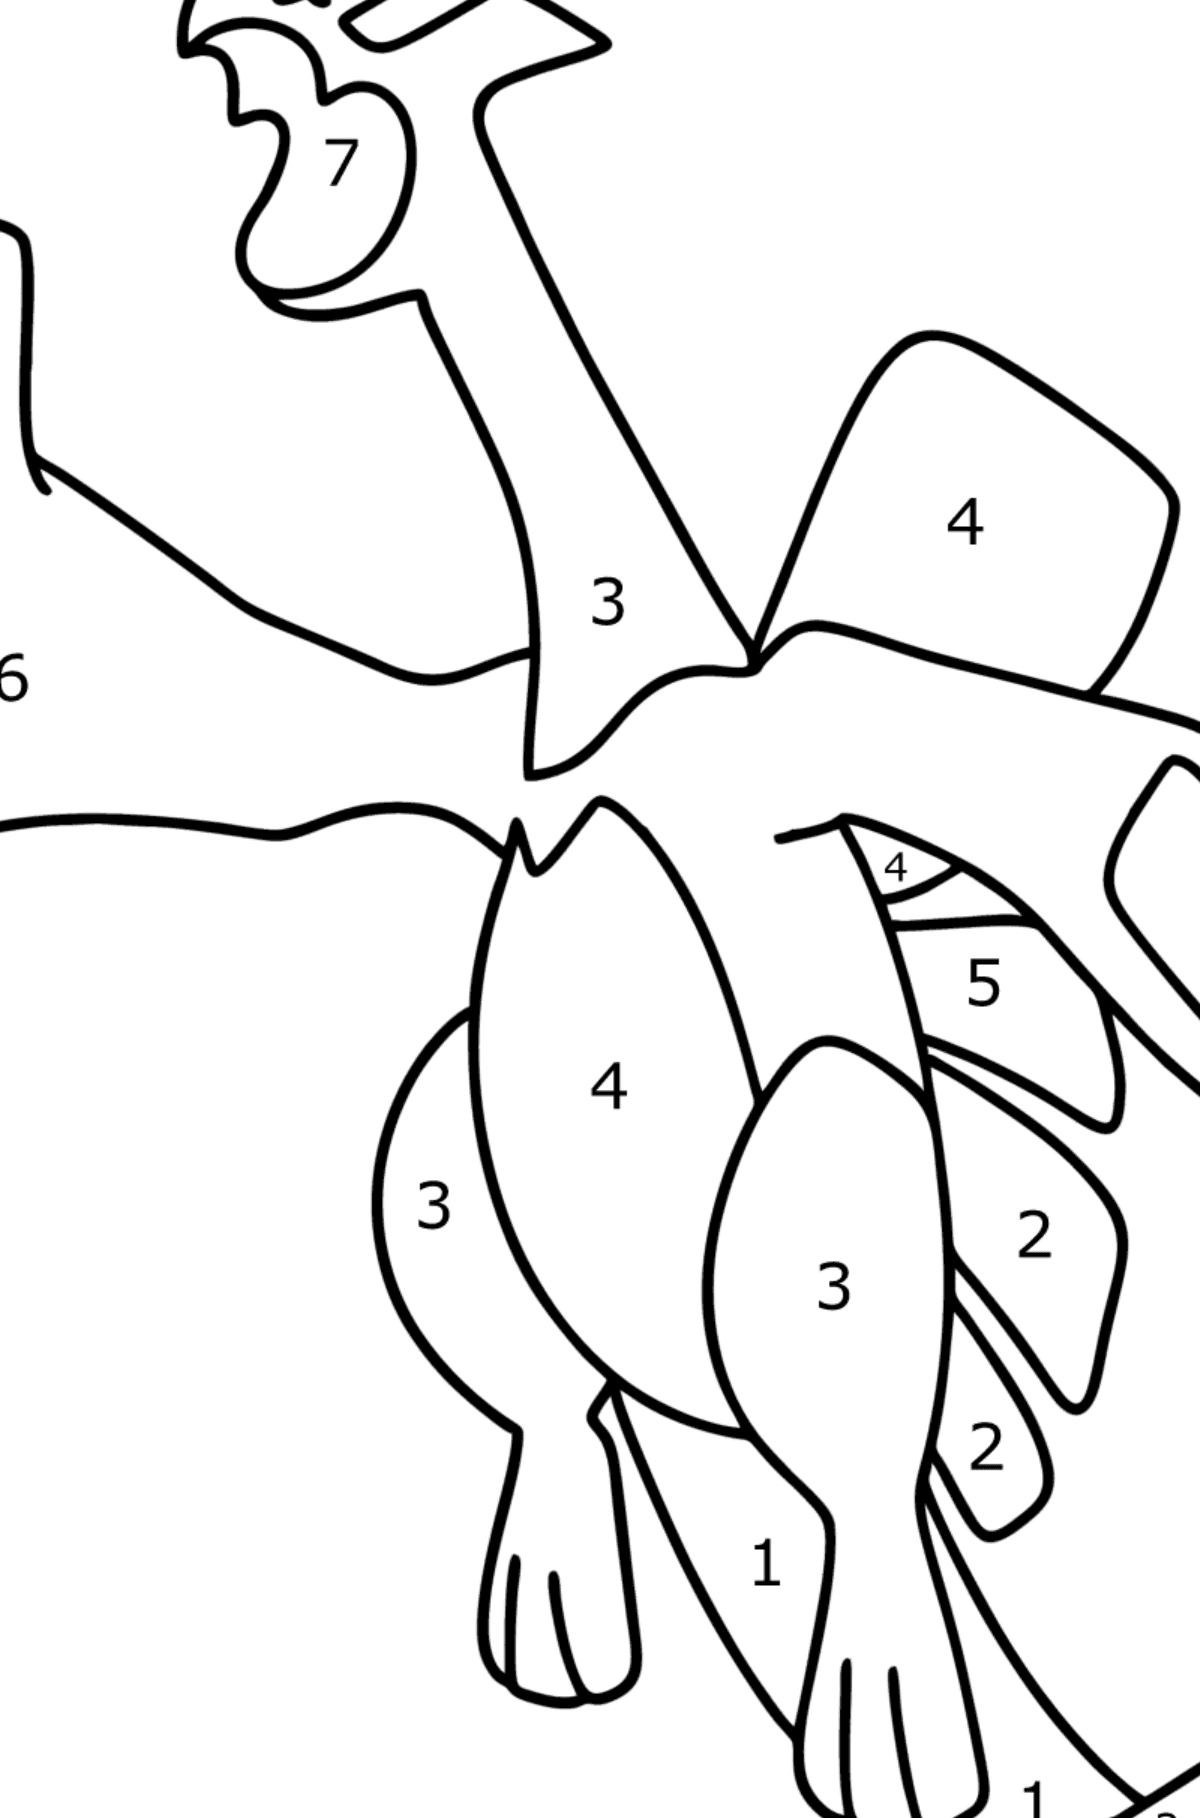 Coloring page Pokemon Go Lugia - Coloring by Numbers for Kids